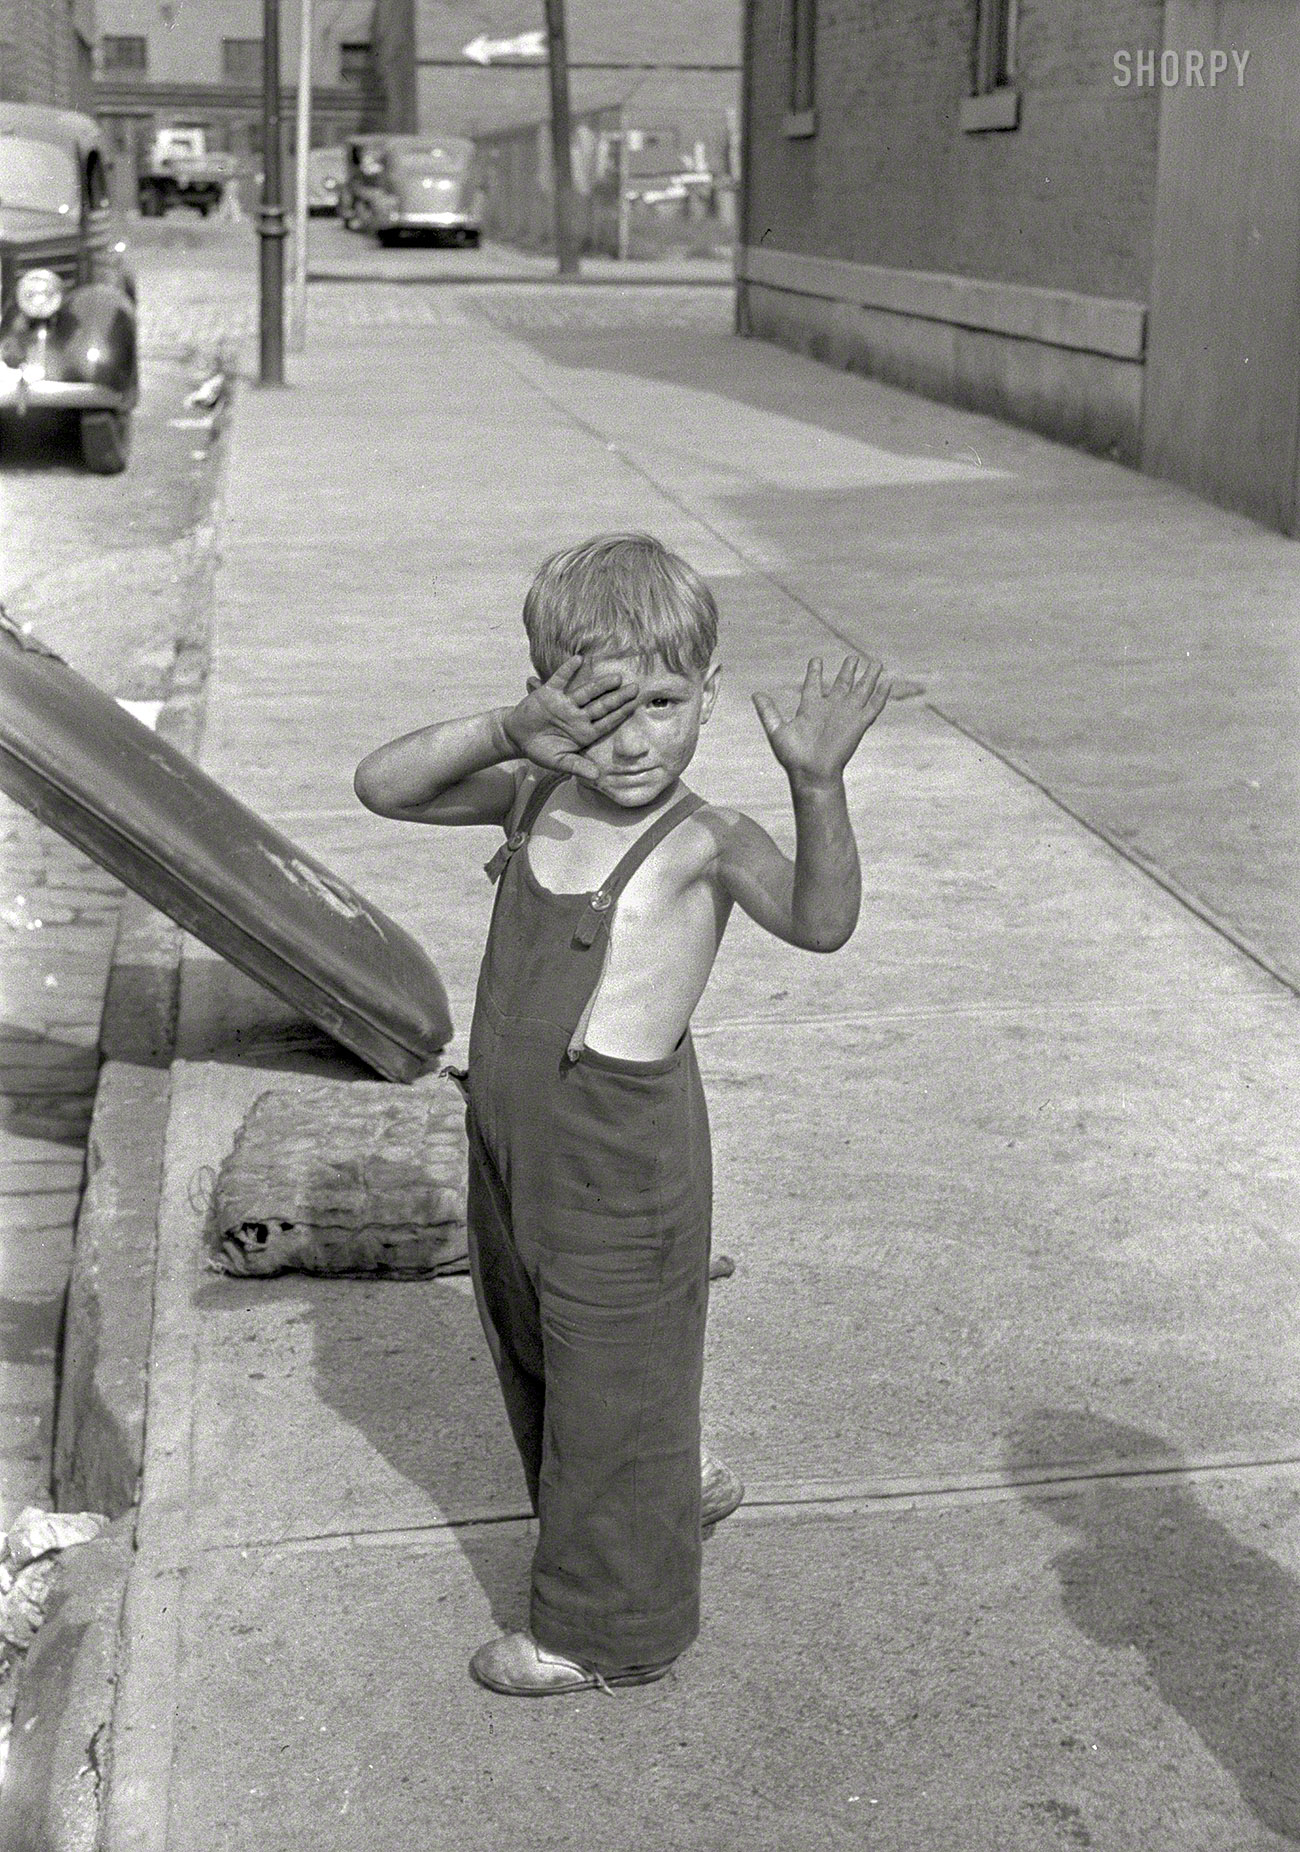 July 1938. "Steelworker's son. Pittsburgh, Pennsylvania." Don't worry, kid. This'll look great on your timeline. Photo by Arthur Rothstein. View full size.